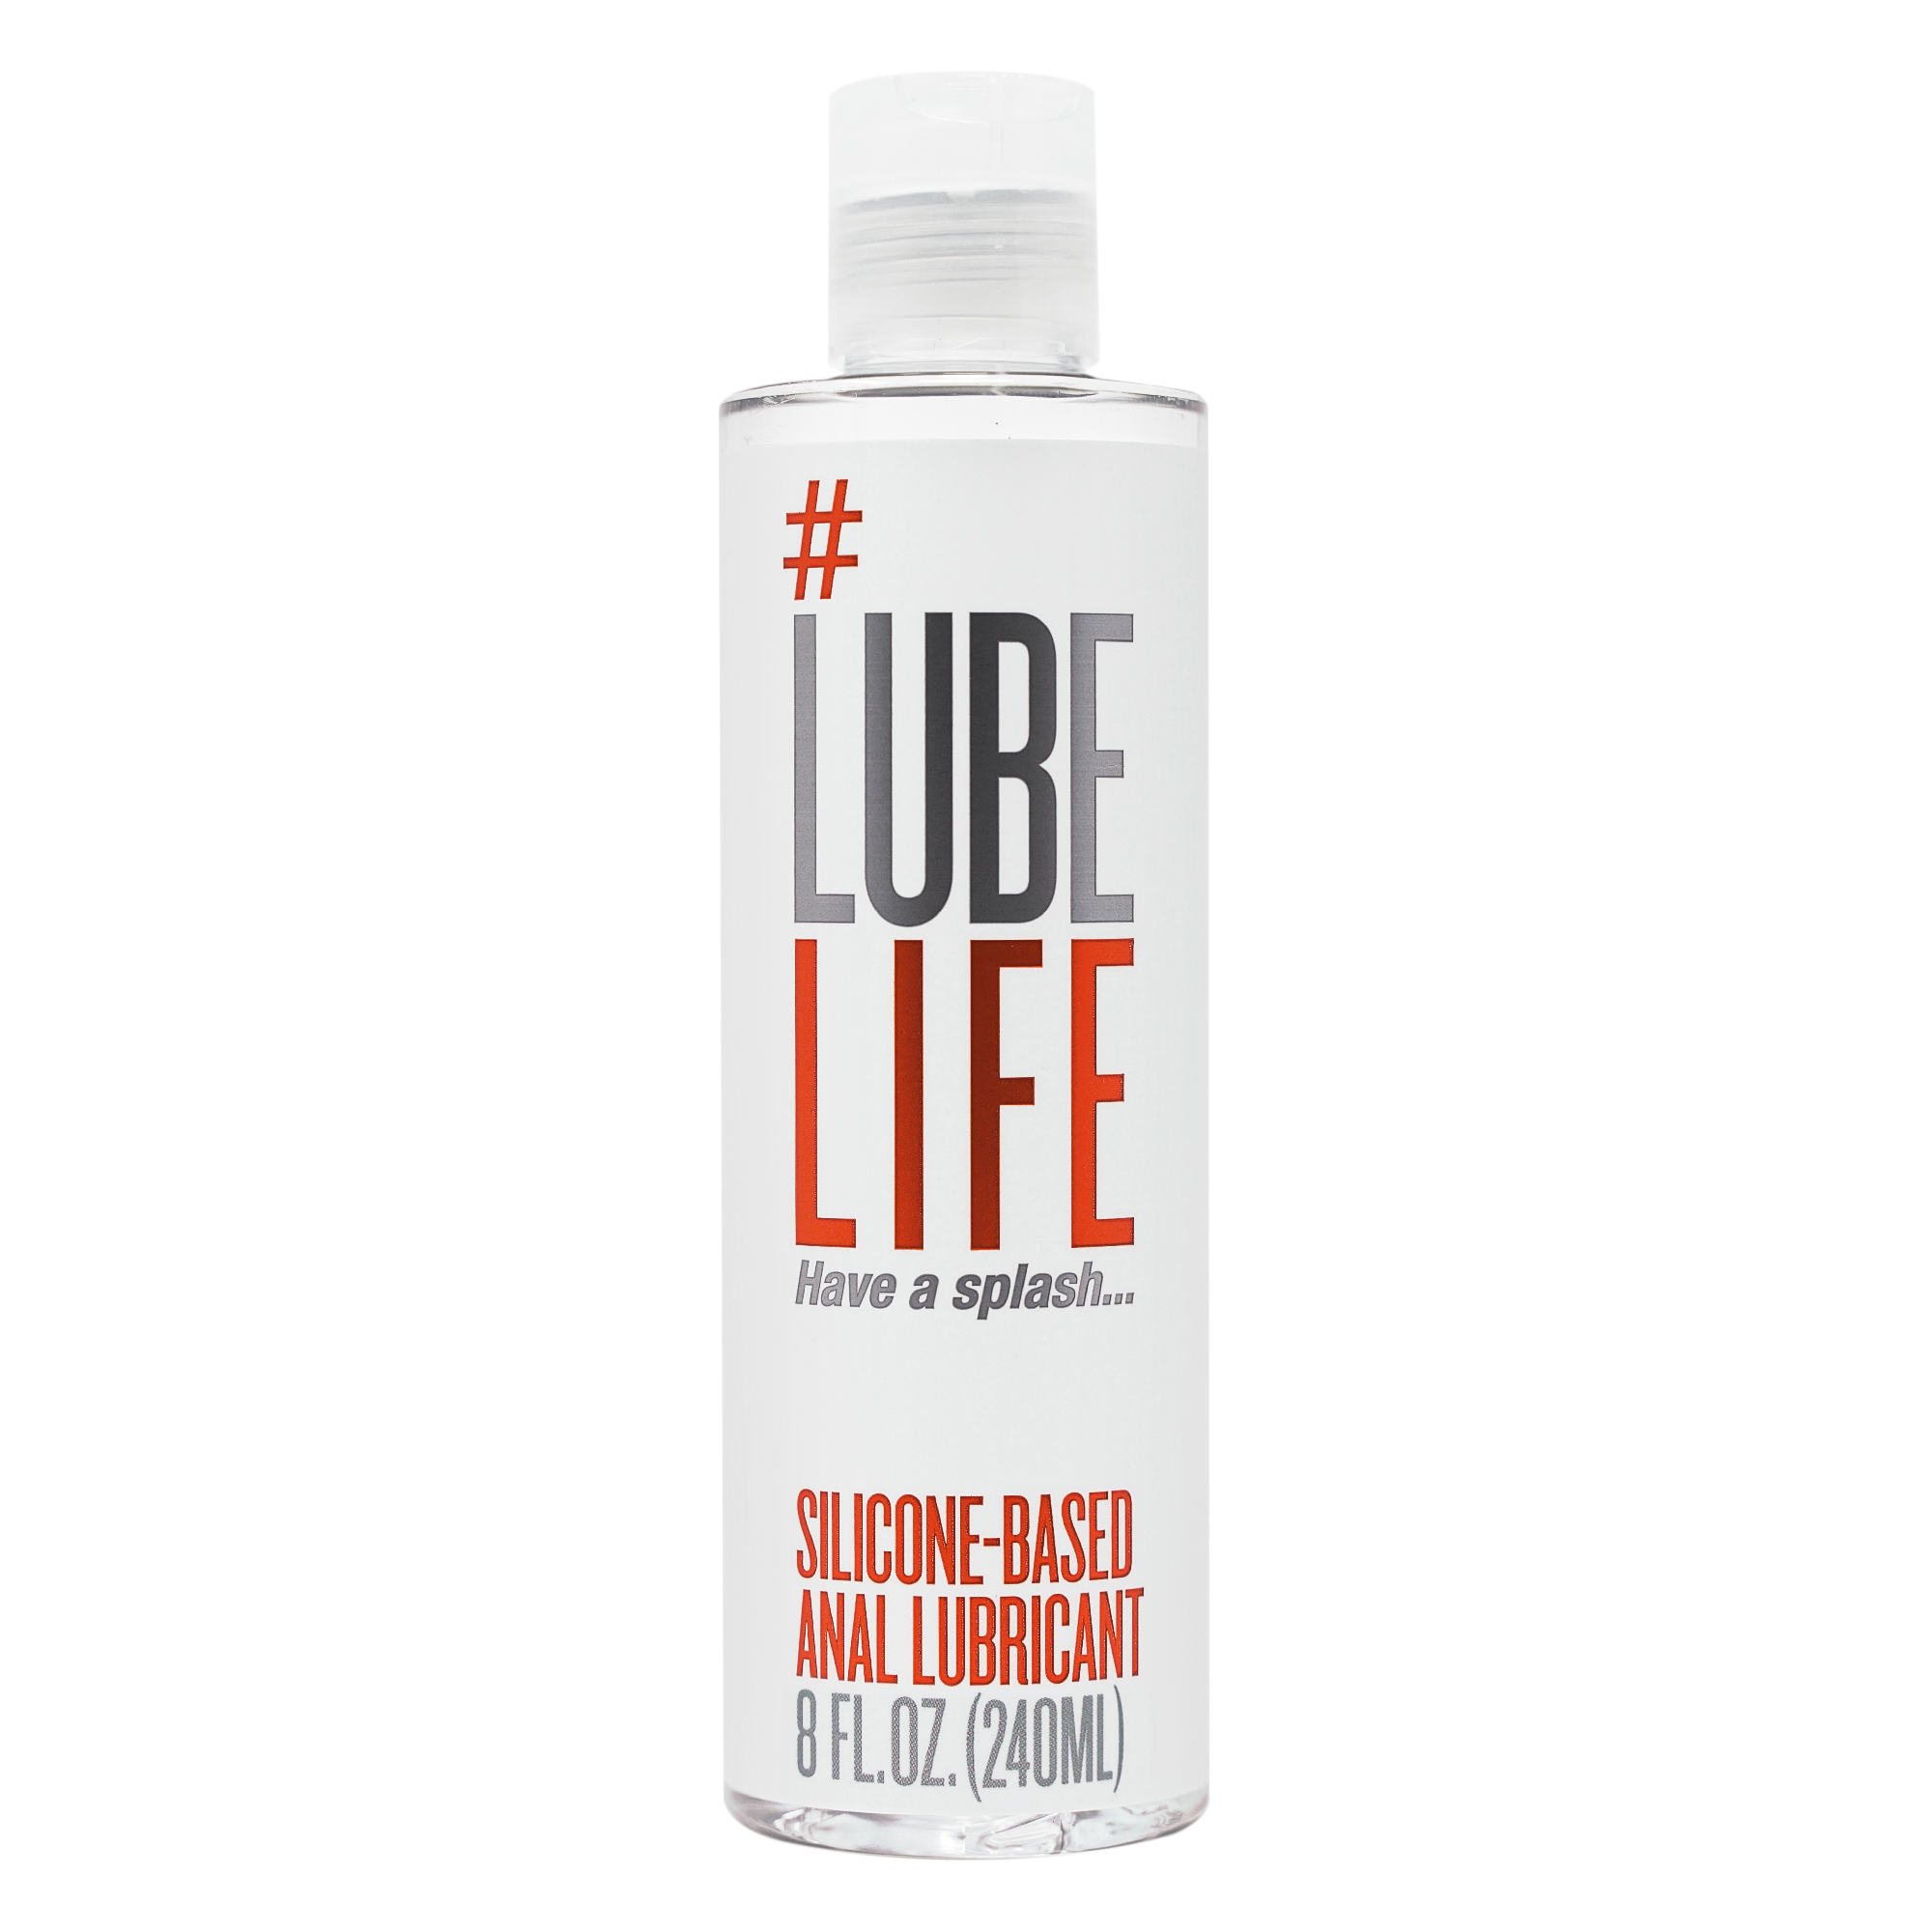 Baby Oil As Anal Lube